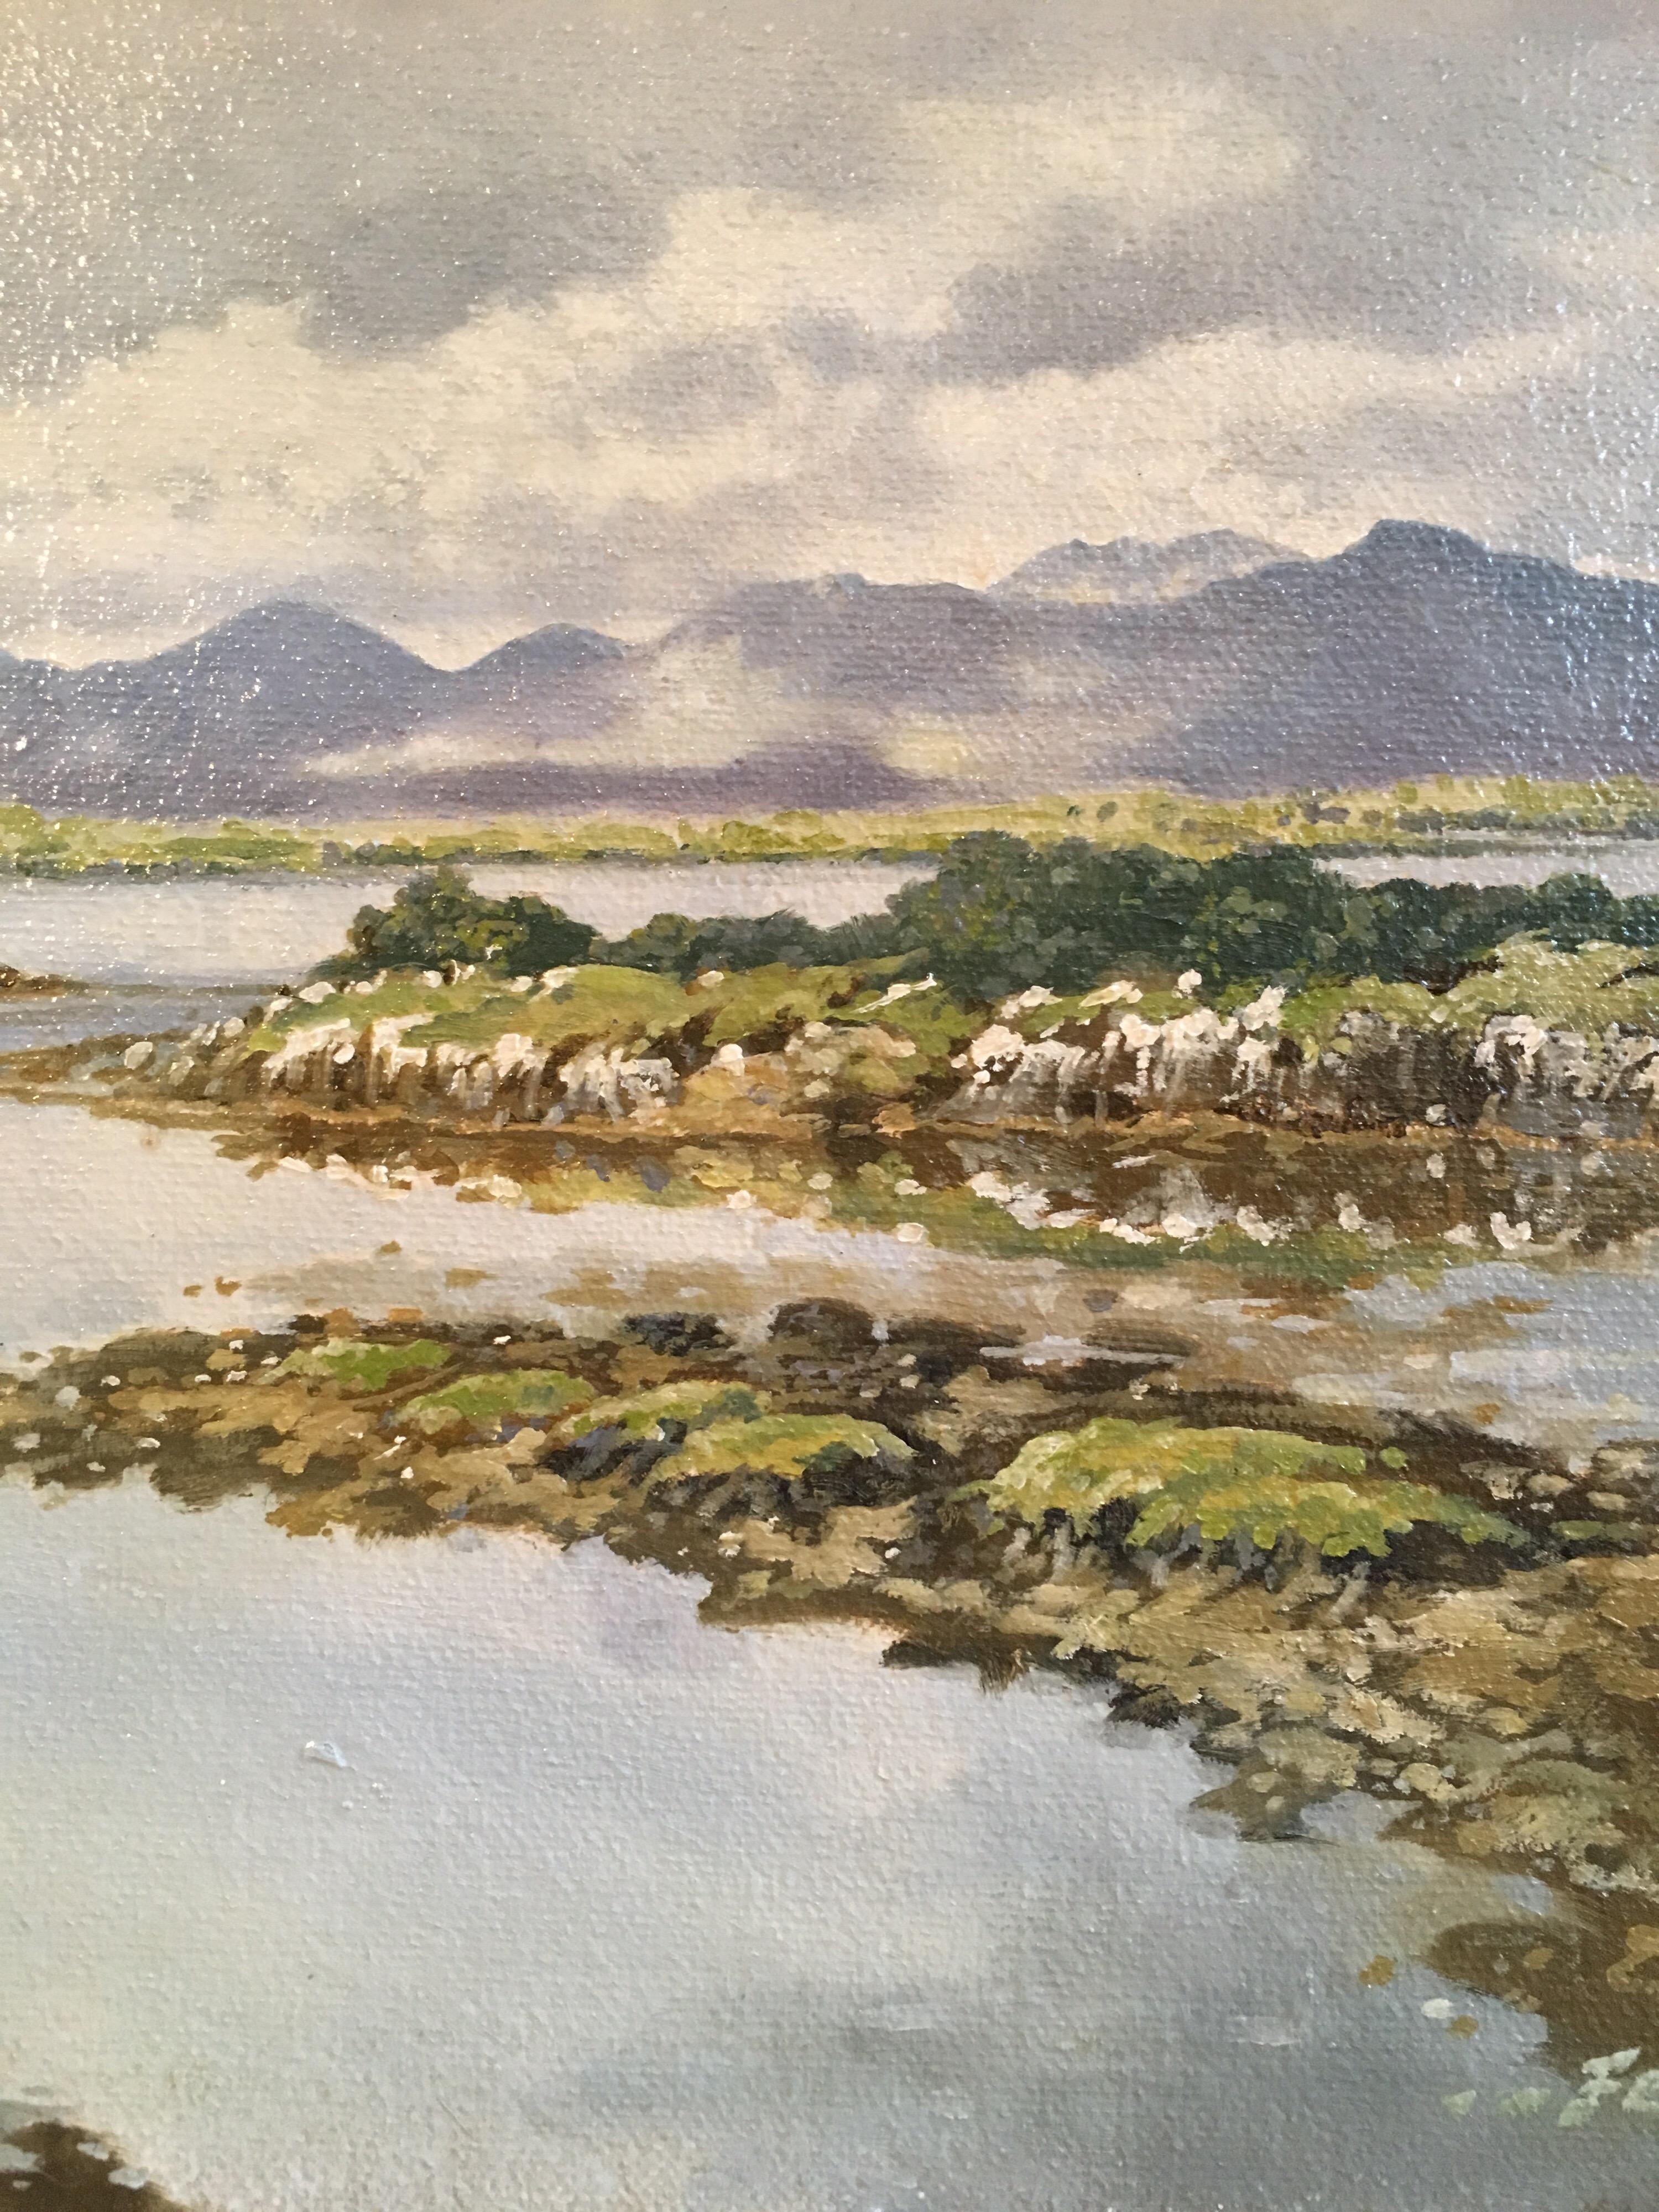 Cloudy Irish Mountains and Estuary, Impressionist Oil, Signed
by Irish artist, Fergal Nolly, 20th Century
signed, lower right hand corner,
oil painting on canvas, framed
Framed size: 11 x 14.5 inches

Wonderful Irish Impressionist landscape painted